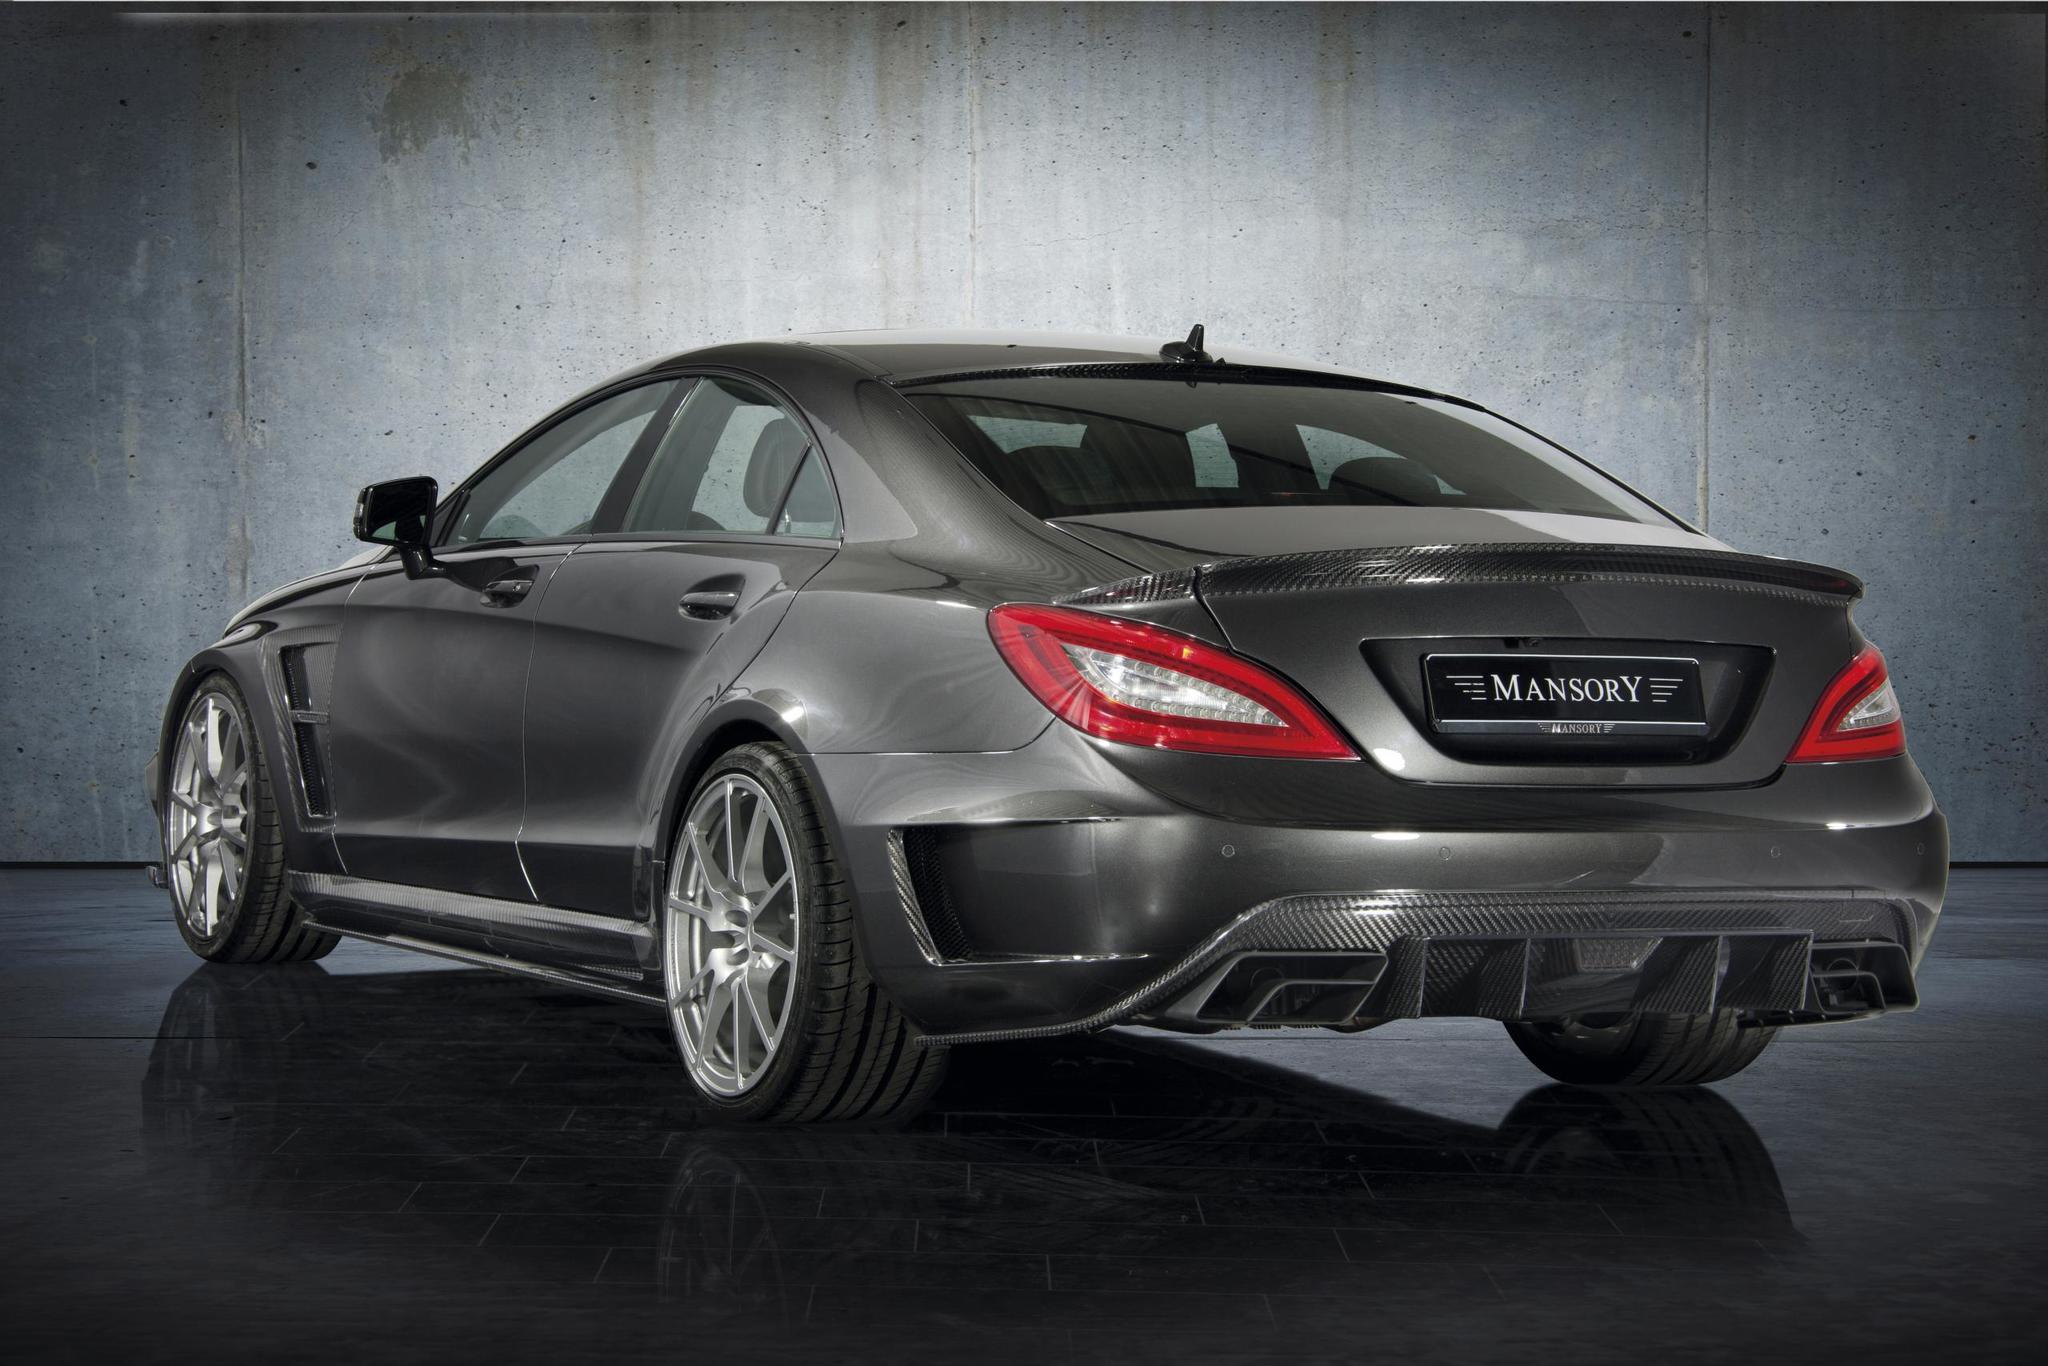 Mansory body kit for Mercedes-Benz CLS new model